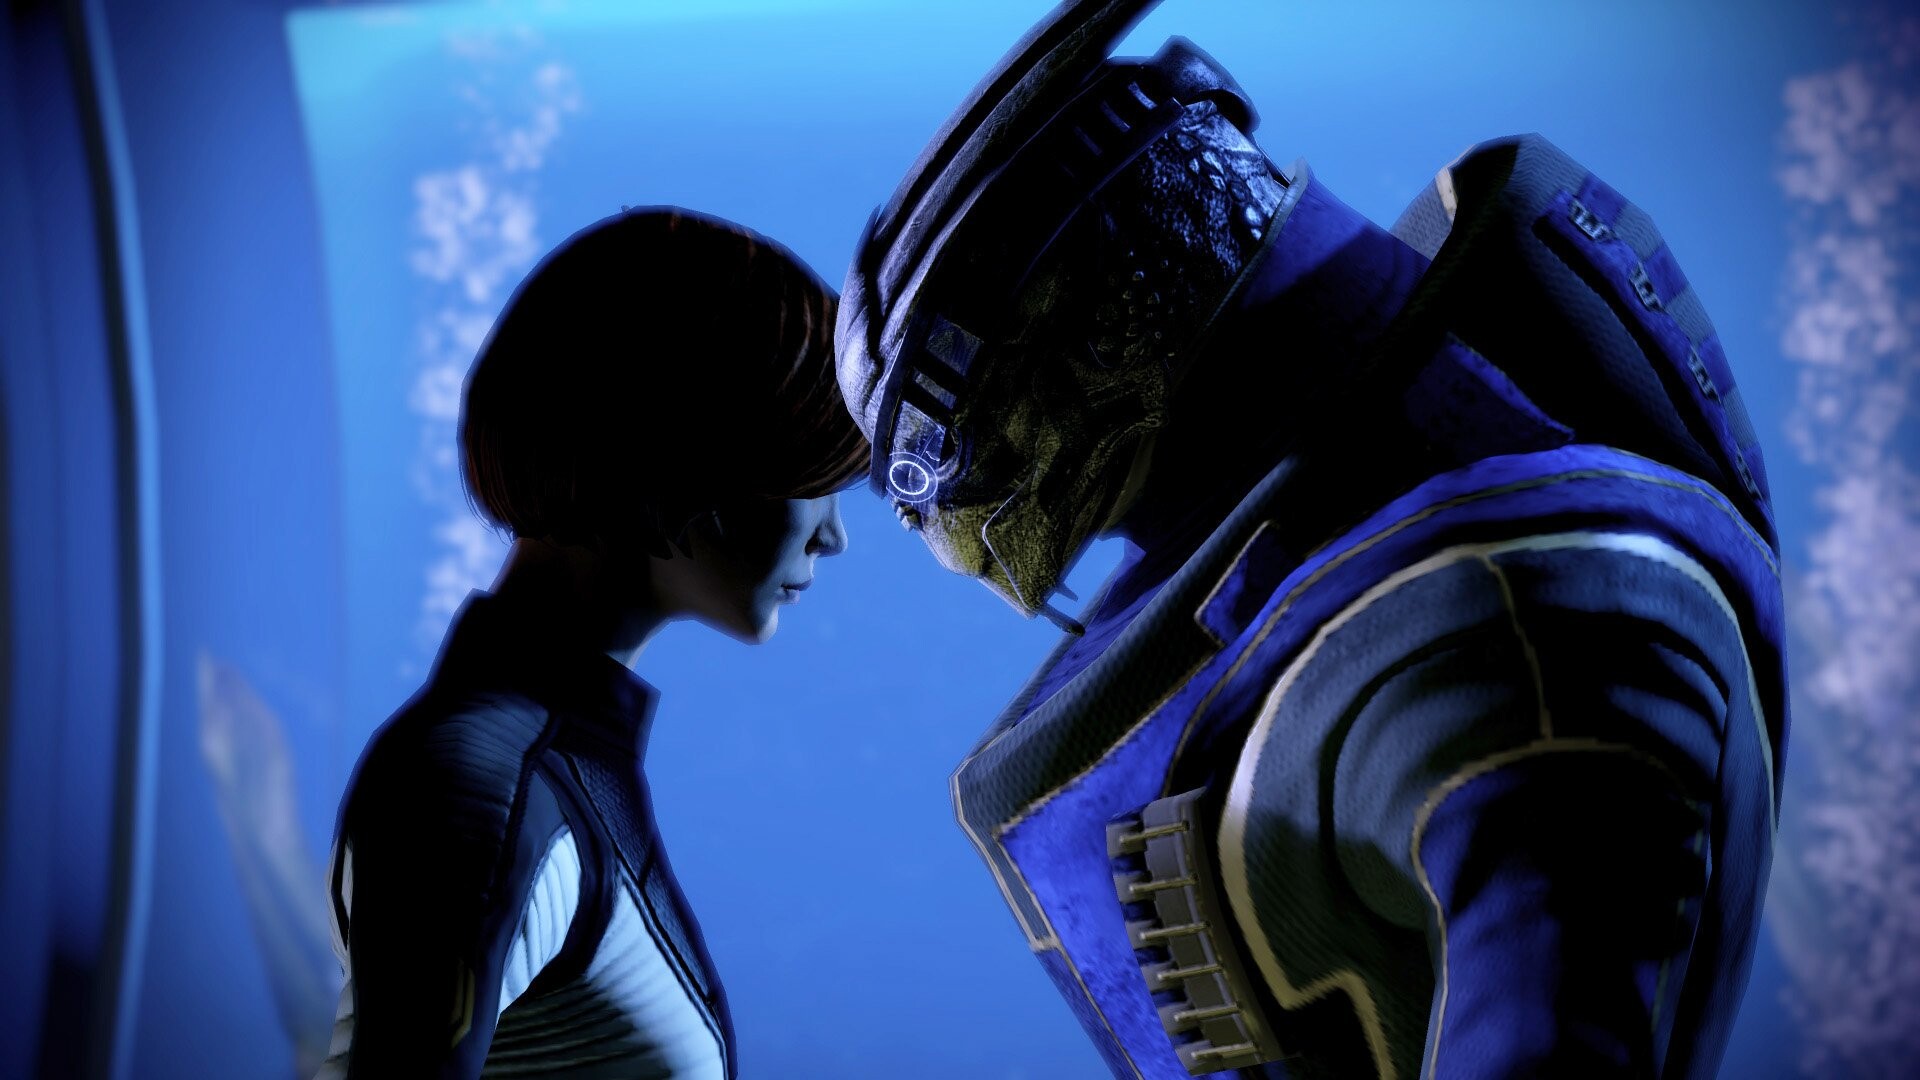 Garrus Vakarian: The moment of love between female Shepard and Archangel before the Suicide Mission in Mass Effect 2. 1920x1080 Full HD Wallpaper.